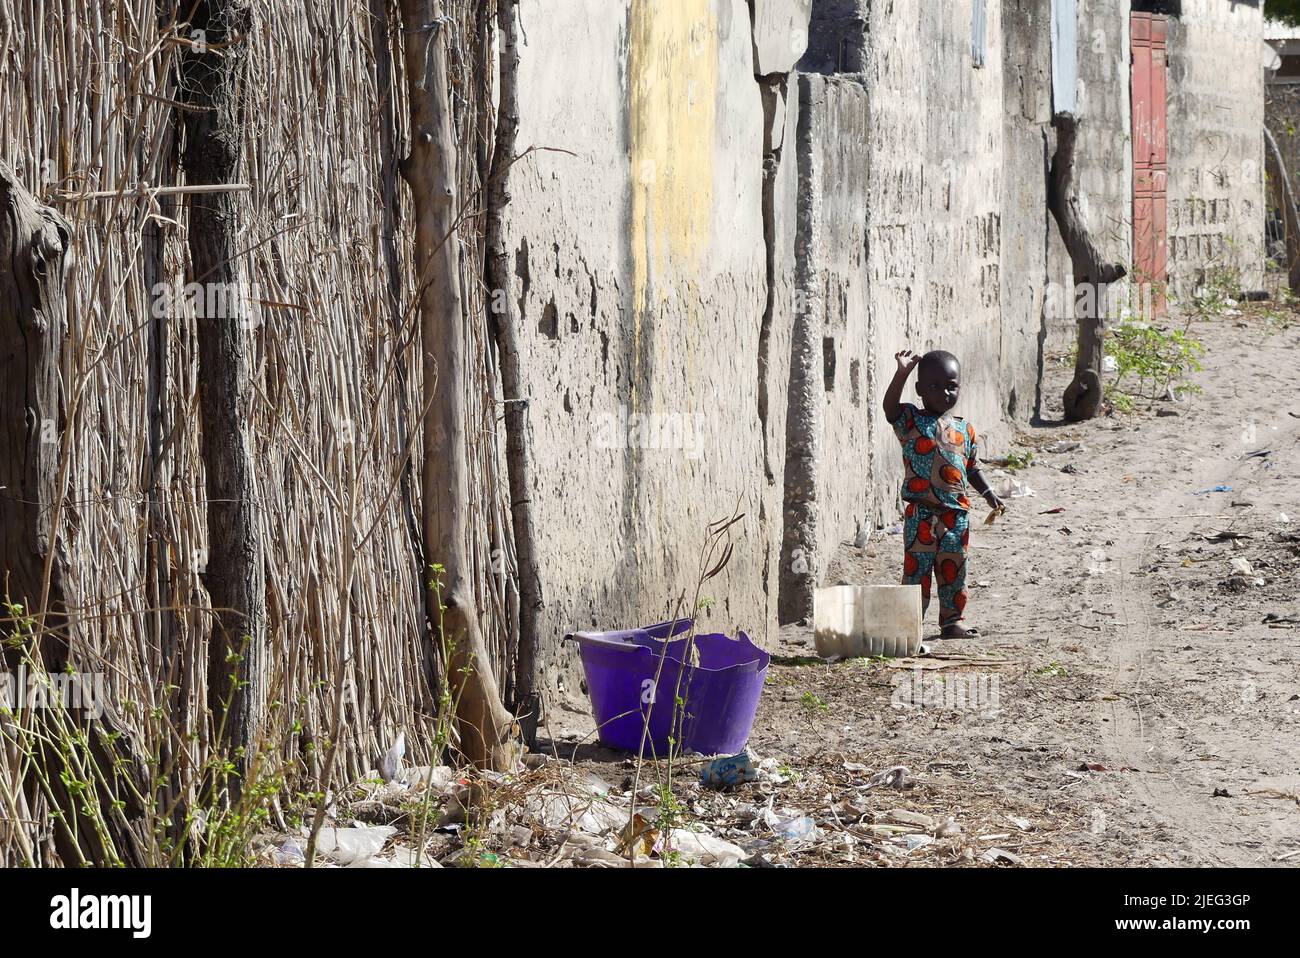 Young black African child, of black color, in a poor neighborhood in Touba city, Senegal, West Africa Stock Photo